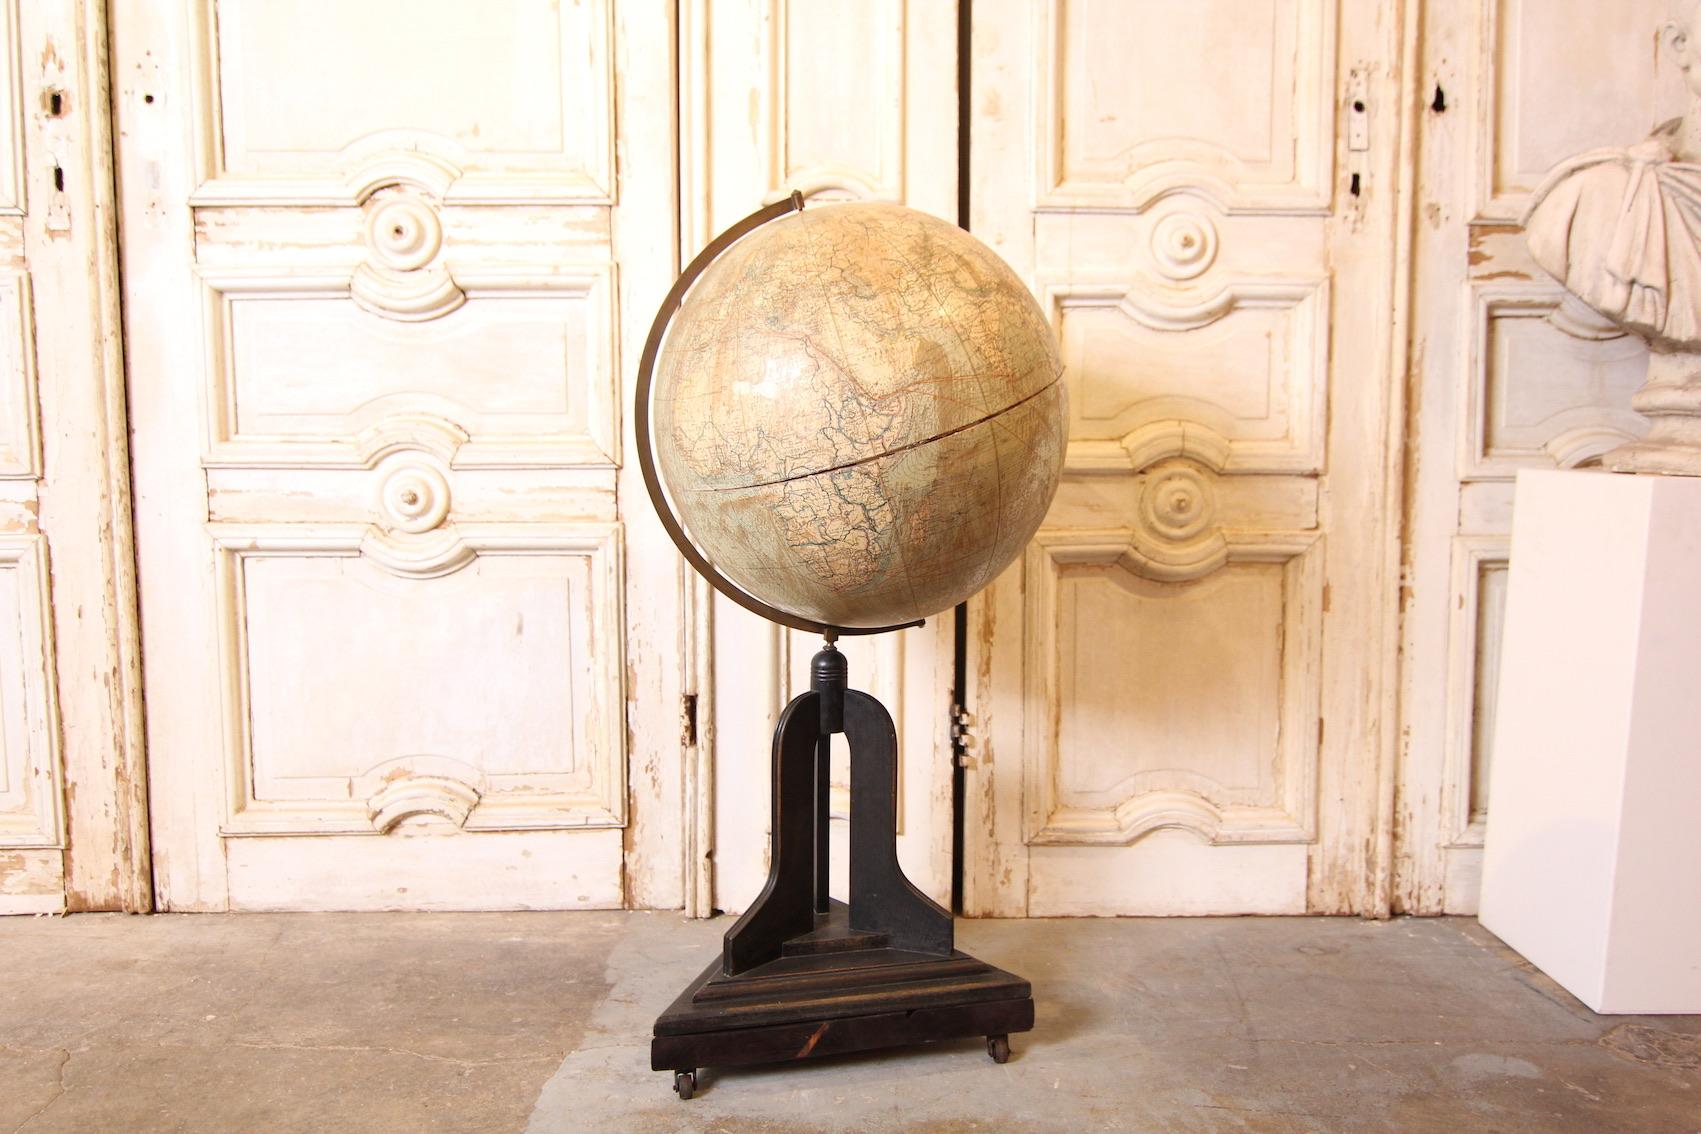 Rare large world traffic globe of the steamship company Norddeutscher Lloyd Bremen.

Between 1900 and 1918, Welt-Reise Verlag Berlin published this model, which was commissioned by the (steam)shipping company Norddeutscher Lloyd. It was produced